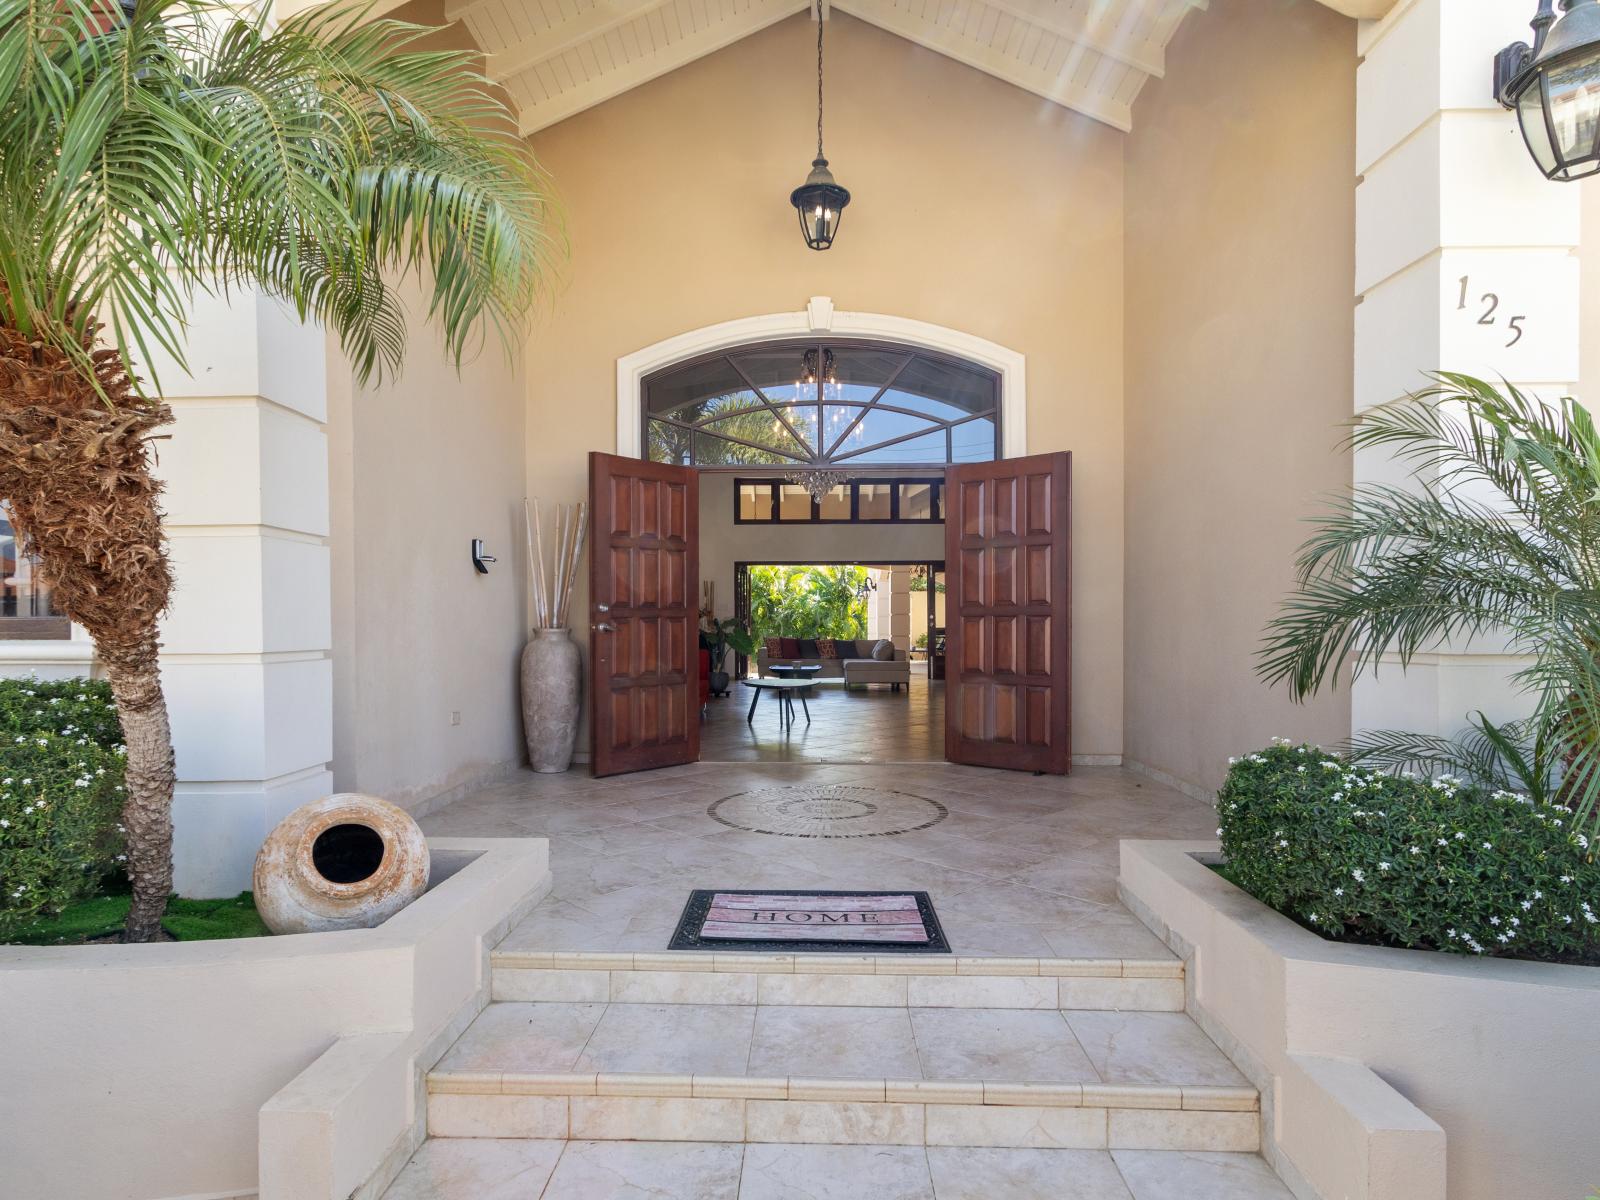 Experience the magic of arrival: our villa entrance greets you with warmth and elegance.